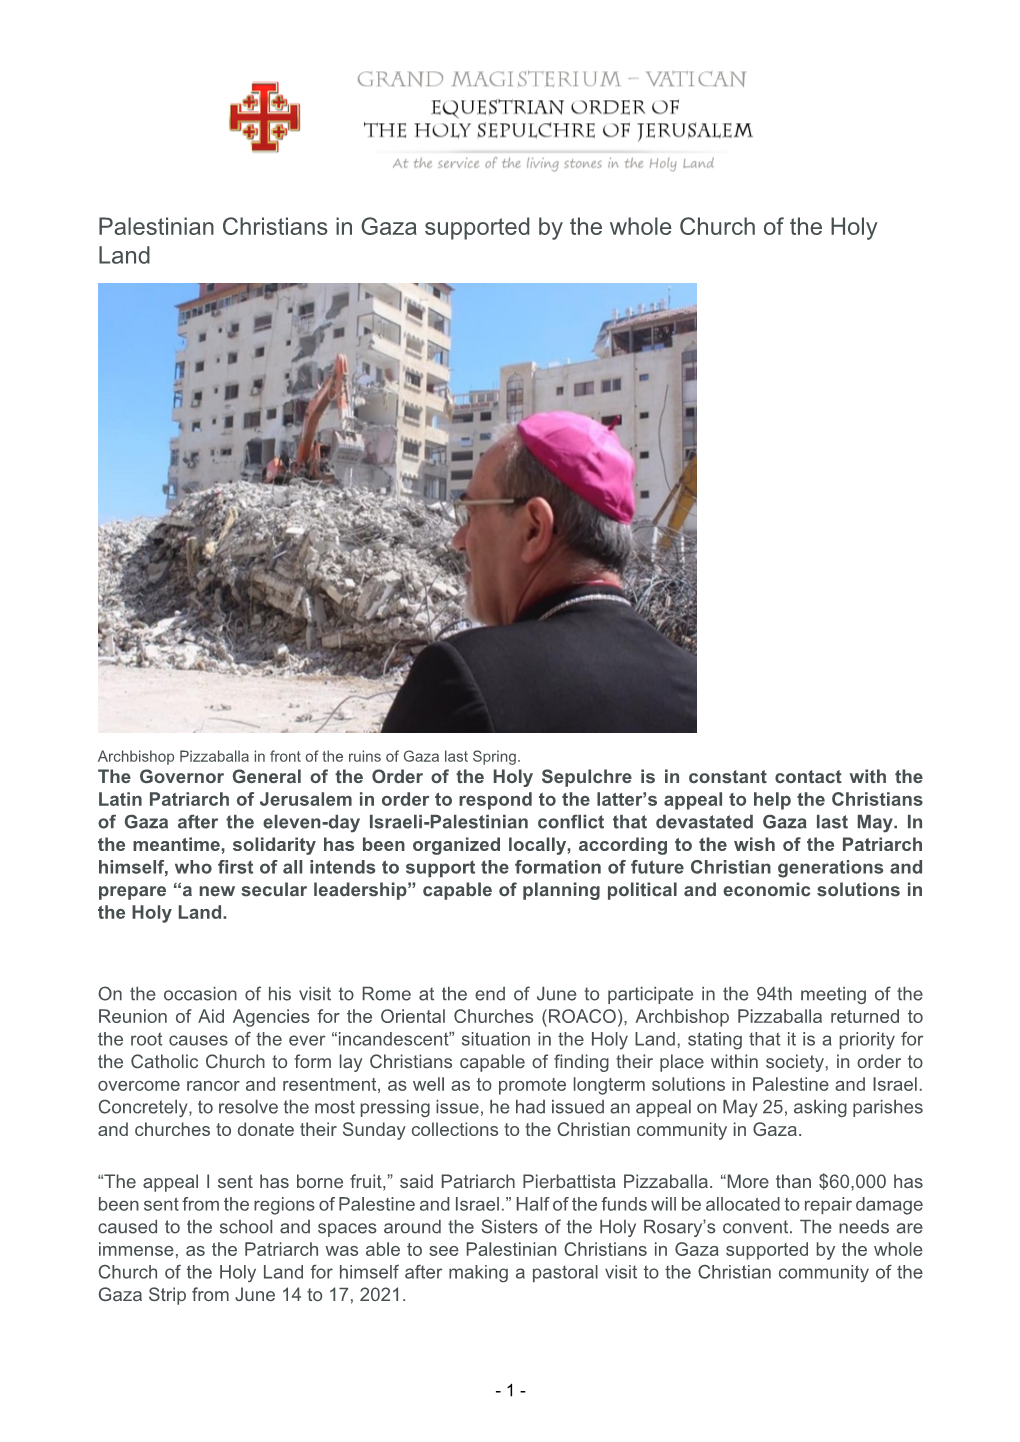 Palestinian Christians in Gaza Supported by the Whole Church of the Holy Land